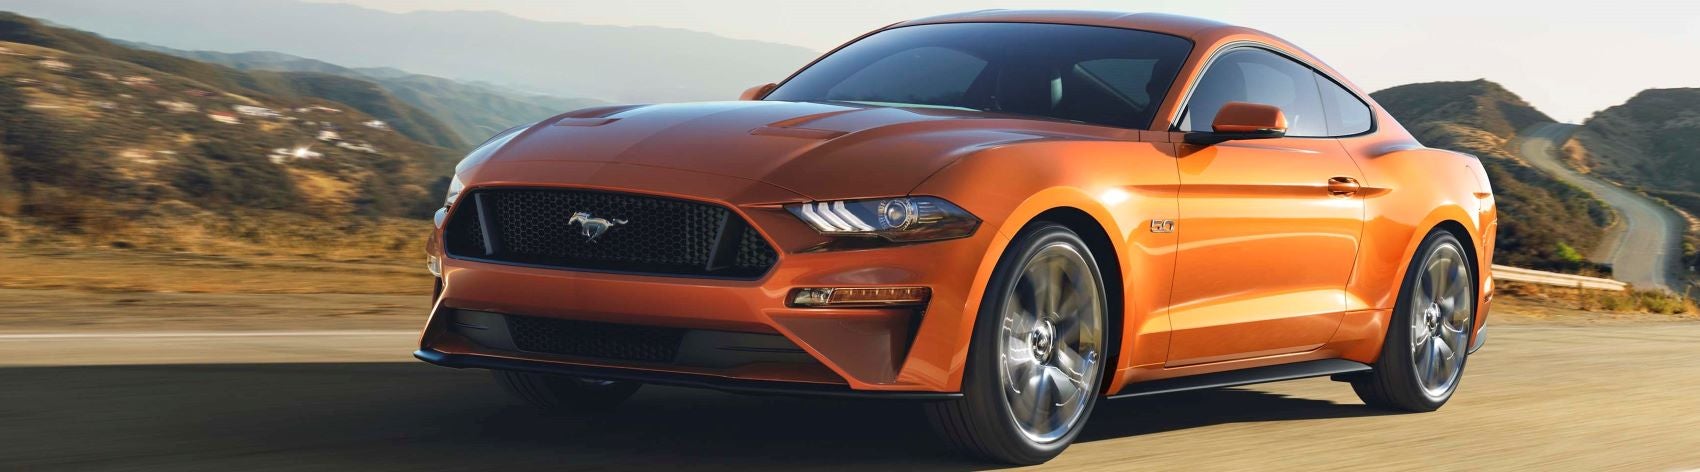 Test Drive The 2021 Ford Mustang Today!